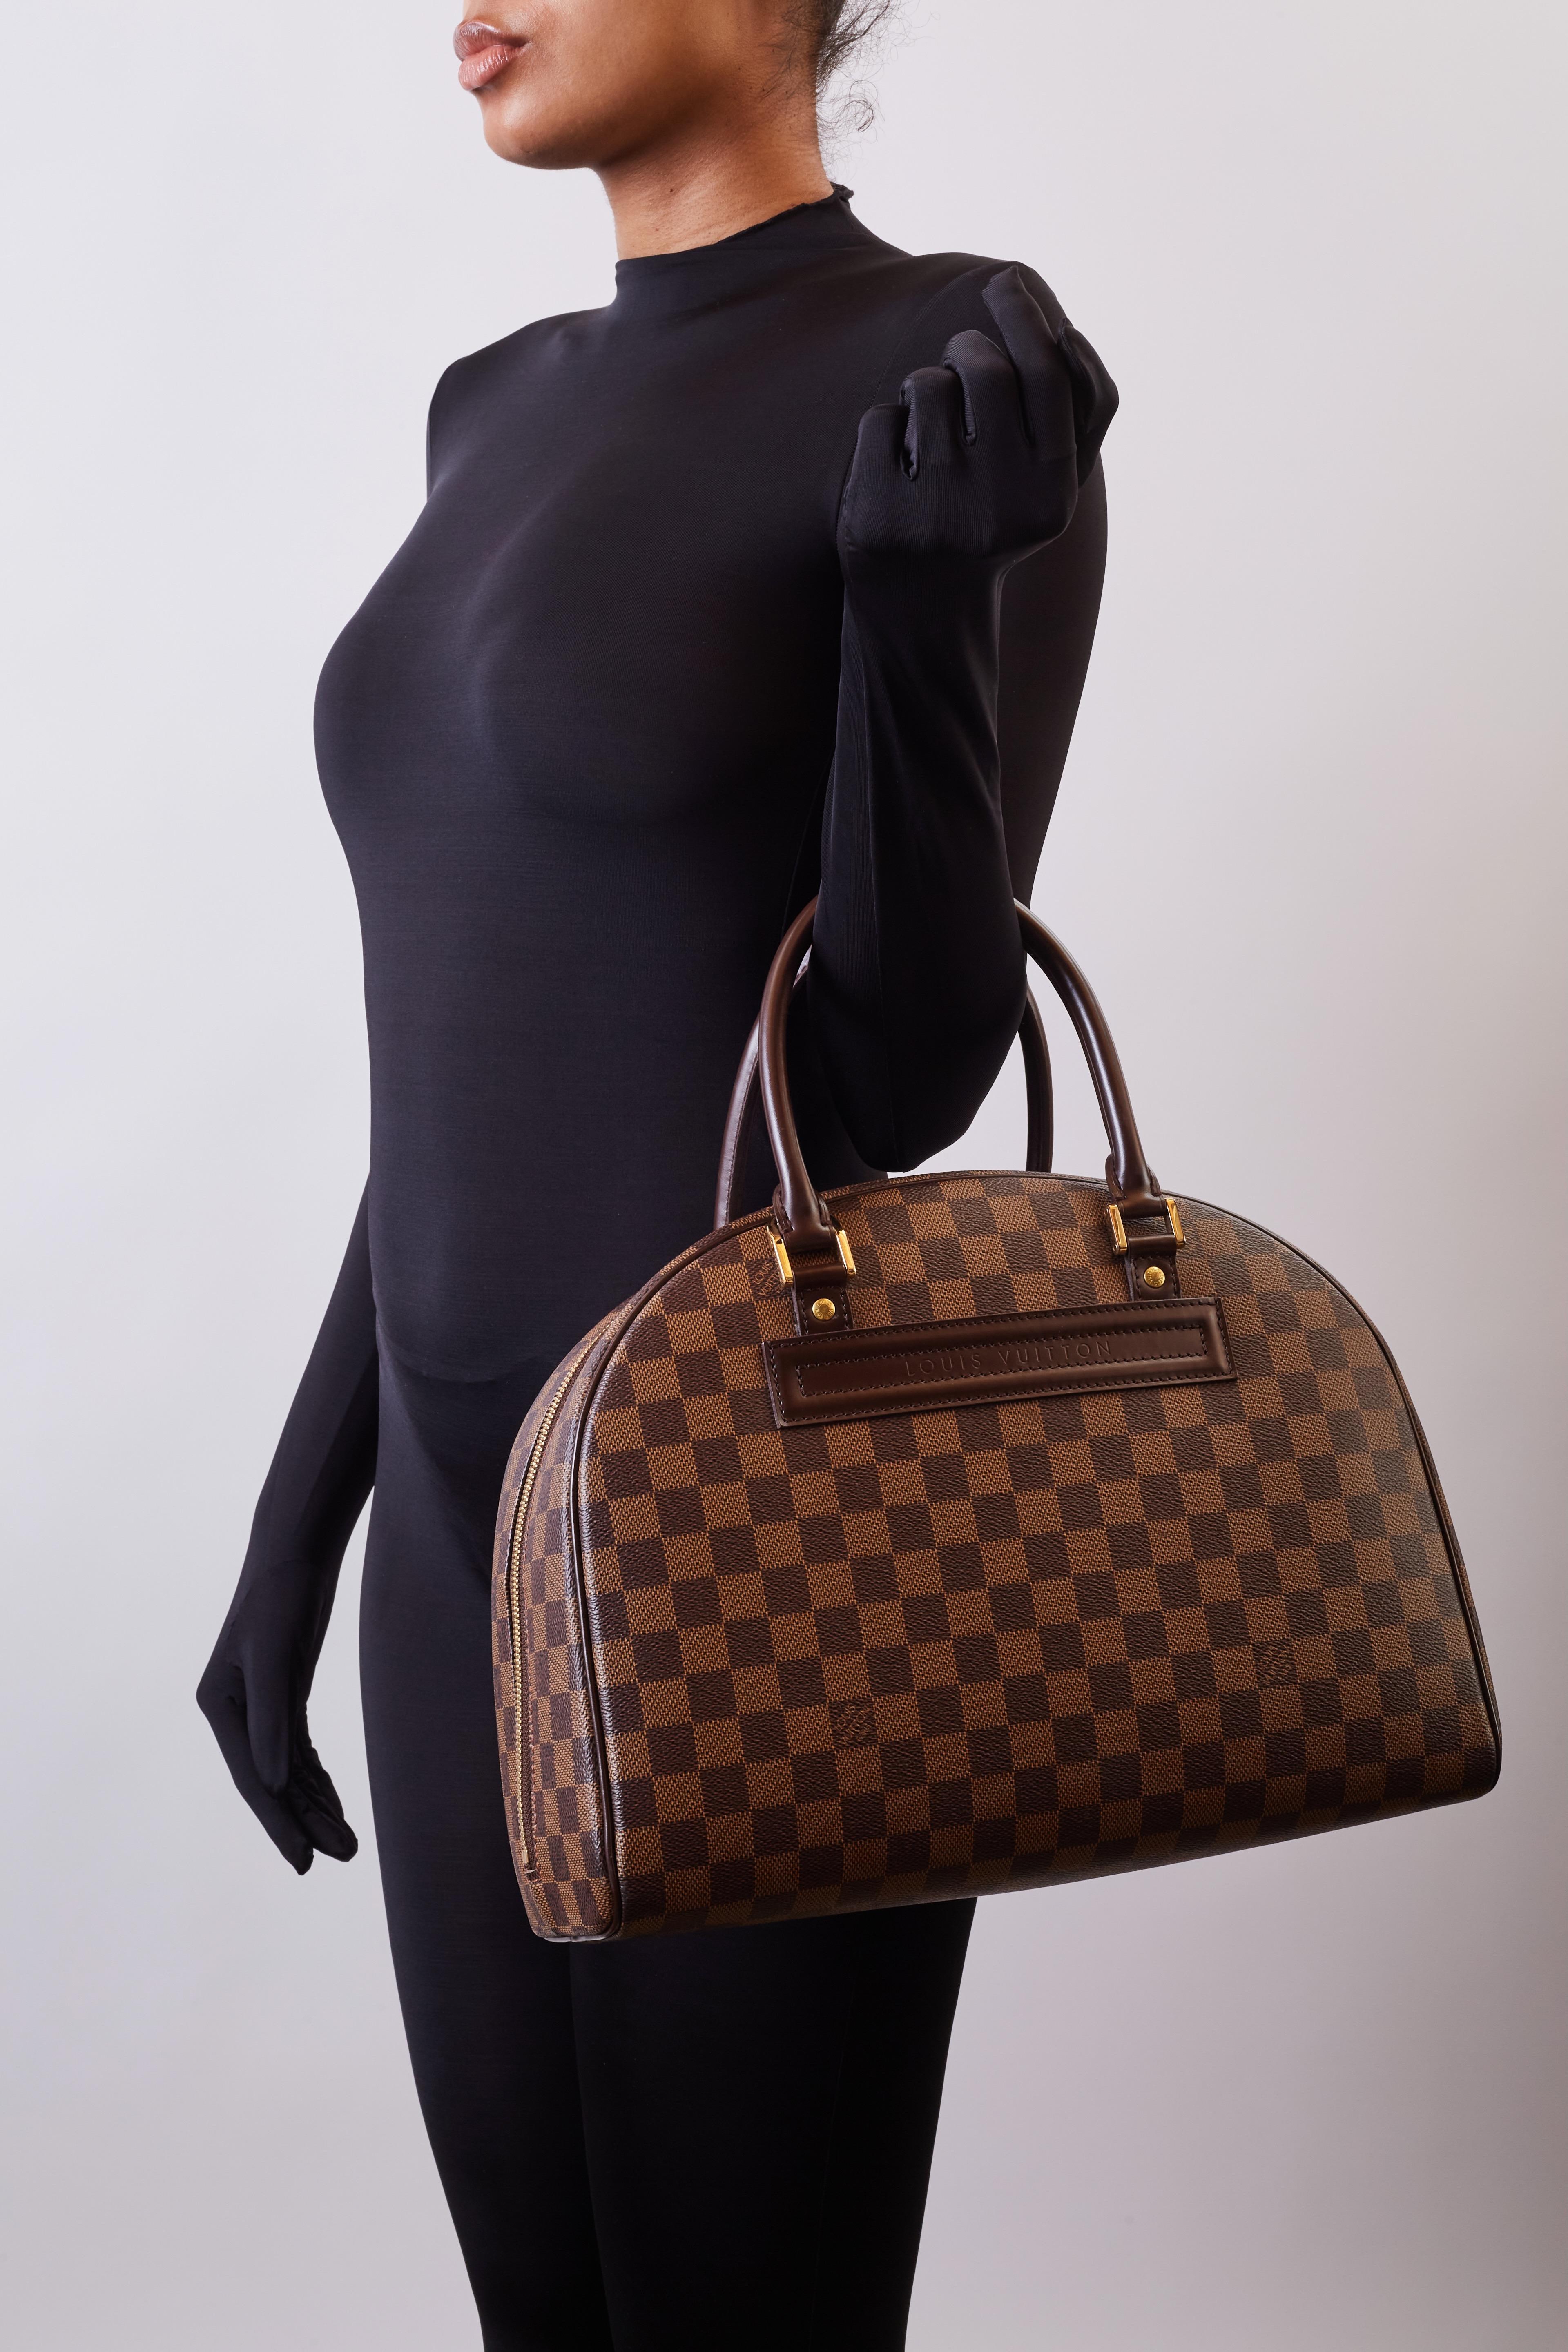 Color: Brown Damier Ebene
Material: Coated canvas with leather finishes
Date Code: SP1014
Measures: H 13” x L 17” x D 7”
Drop: 4”
Comes with: Dust bag
Condition: Good. Leather is pealing from one of the rolled top handles. Light interior  residue